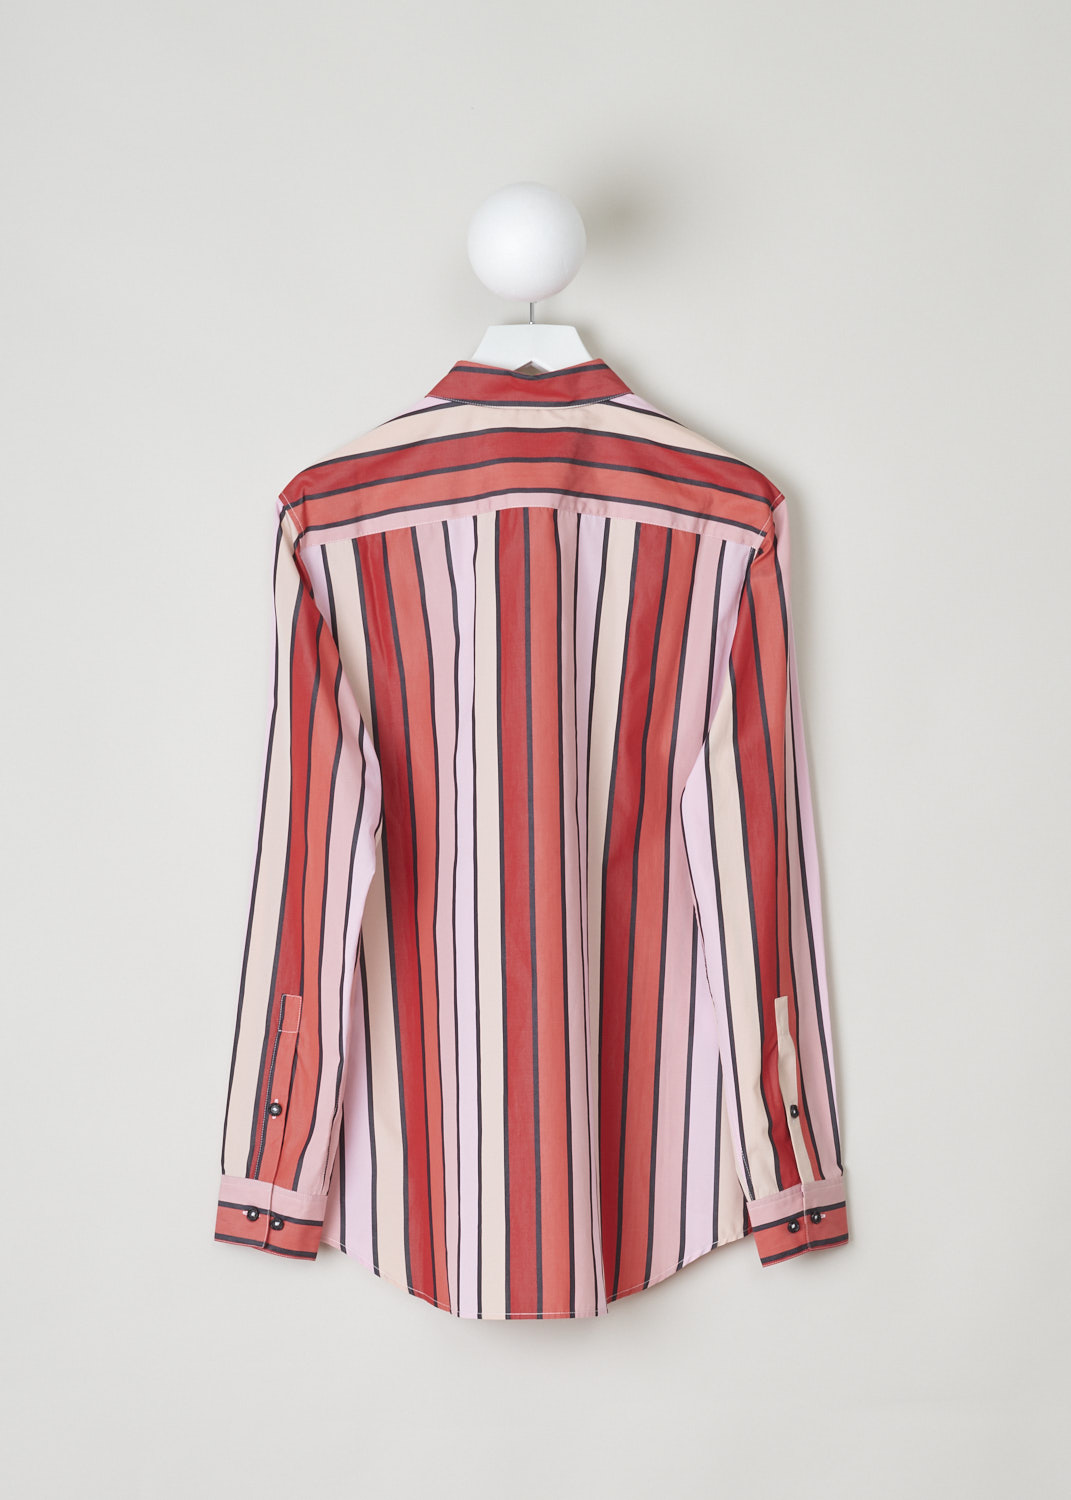 Marni, Multicolour striped blouse, CAMA0403A0_TCZ52_STR69, red pink beige black print, back, Made in the classic blouse model featuring a pointed collar, long cuffed sleeves and a button fastening on the front. What makes this model stand out so much is the cheerful coloured print, where strokes of red, pink, beige and black alternate each other.